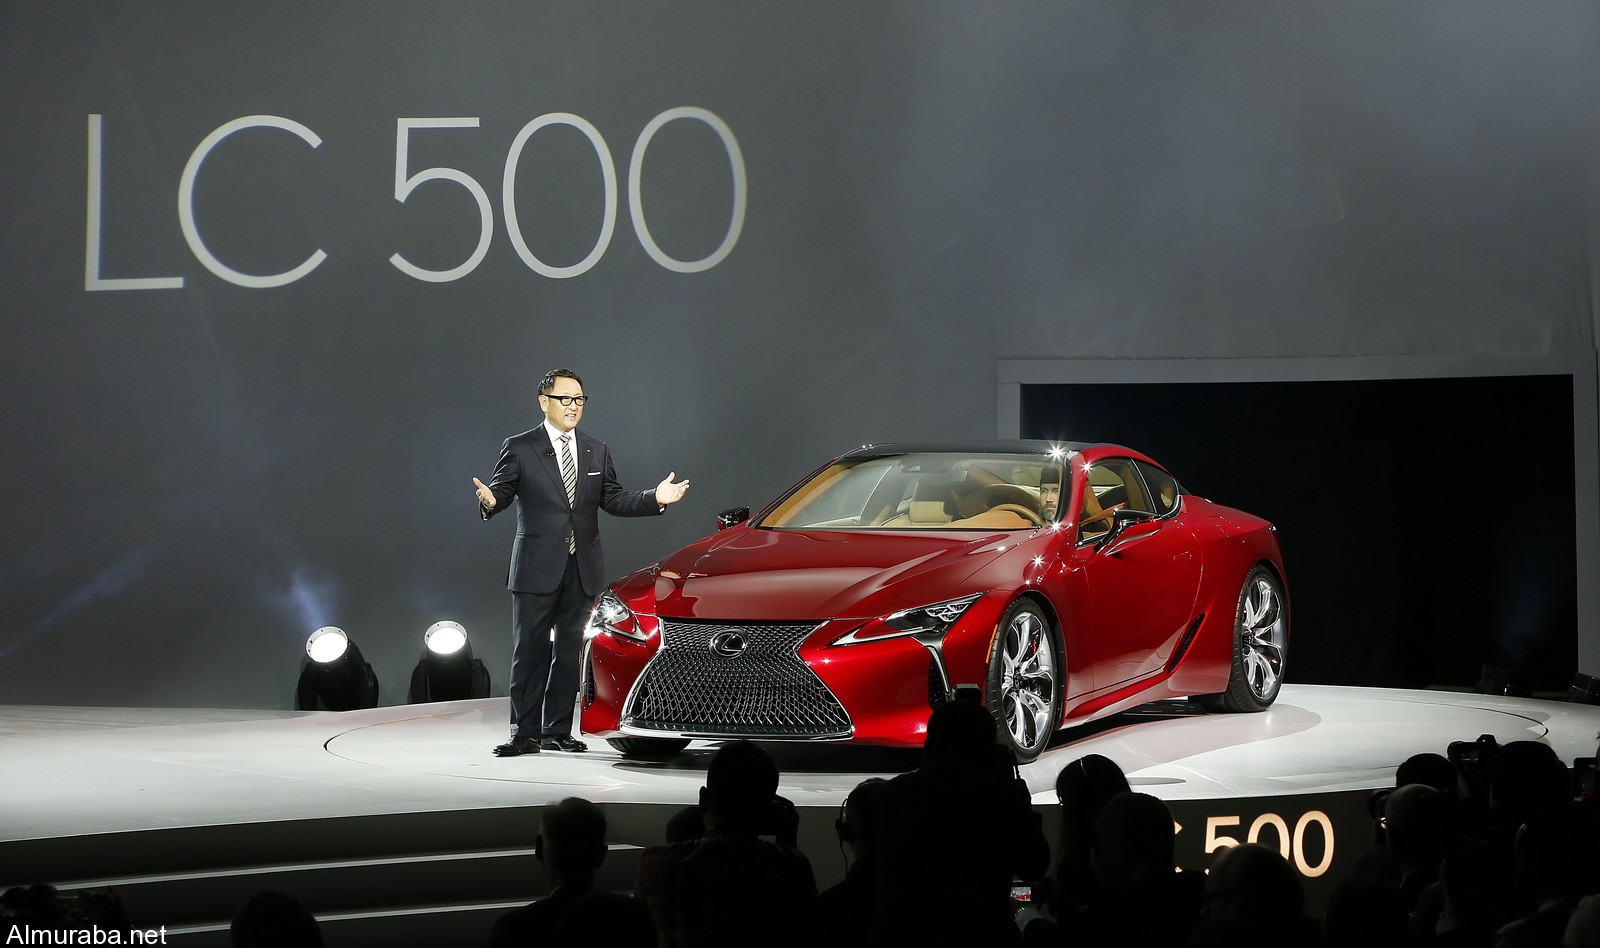 Detroit – January 11, 2016 – Akio Toyoda, Toyota Motor Corporation President and Lexus Chief Branding Officer unveiled the all-new Lexus LC 500 luxury sports car at the North American International Auto Show.  Lexus LC 500 features a 467 hp., V-8 engine, a 10-speed automatic transmission and amazing driving dynamics.  For more information contact Maurice Durand at 714-889-9908.